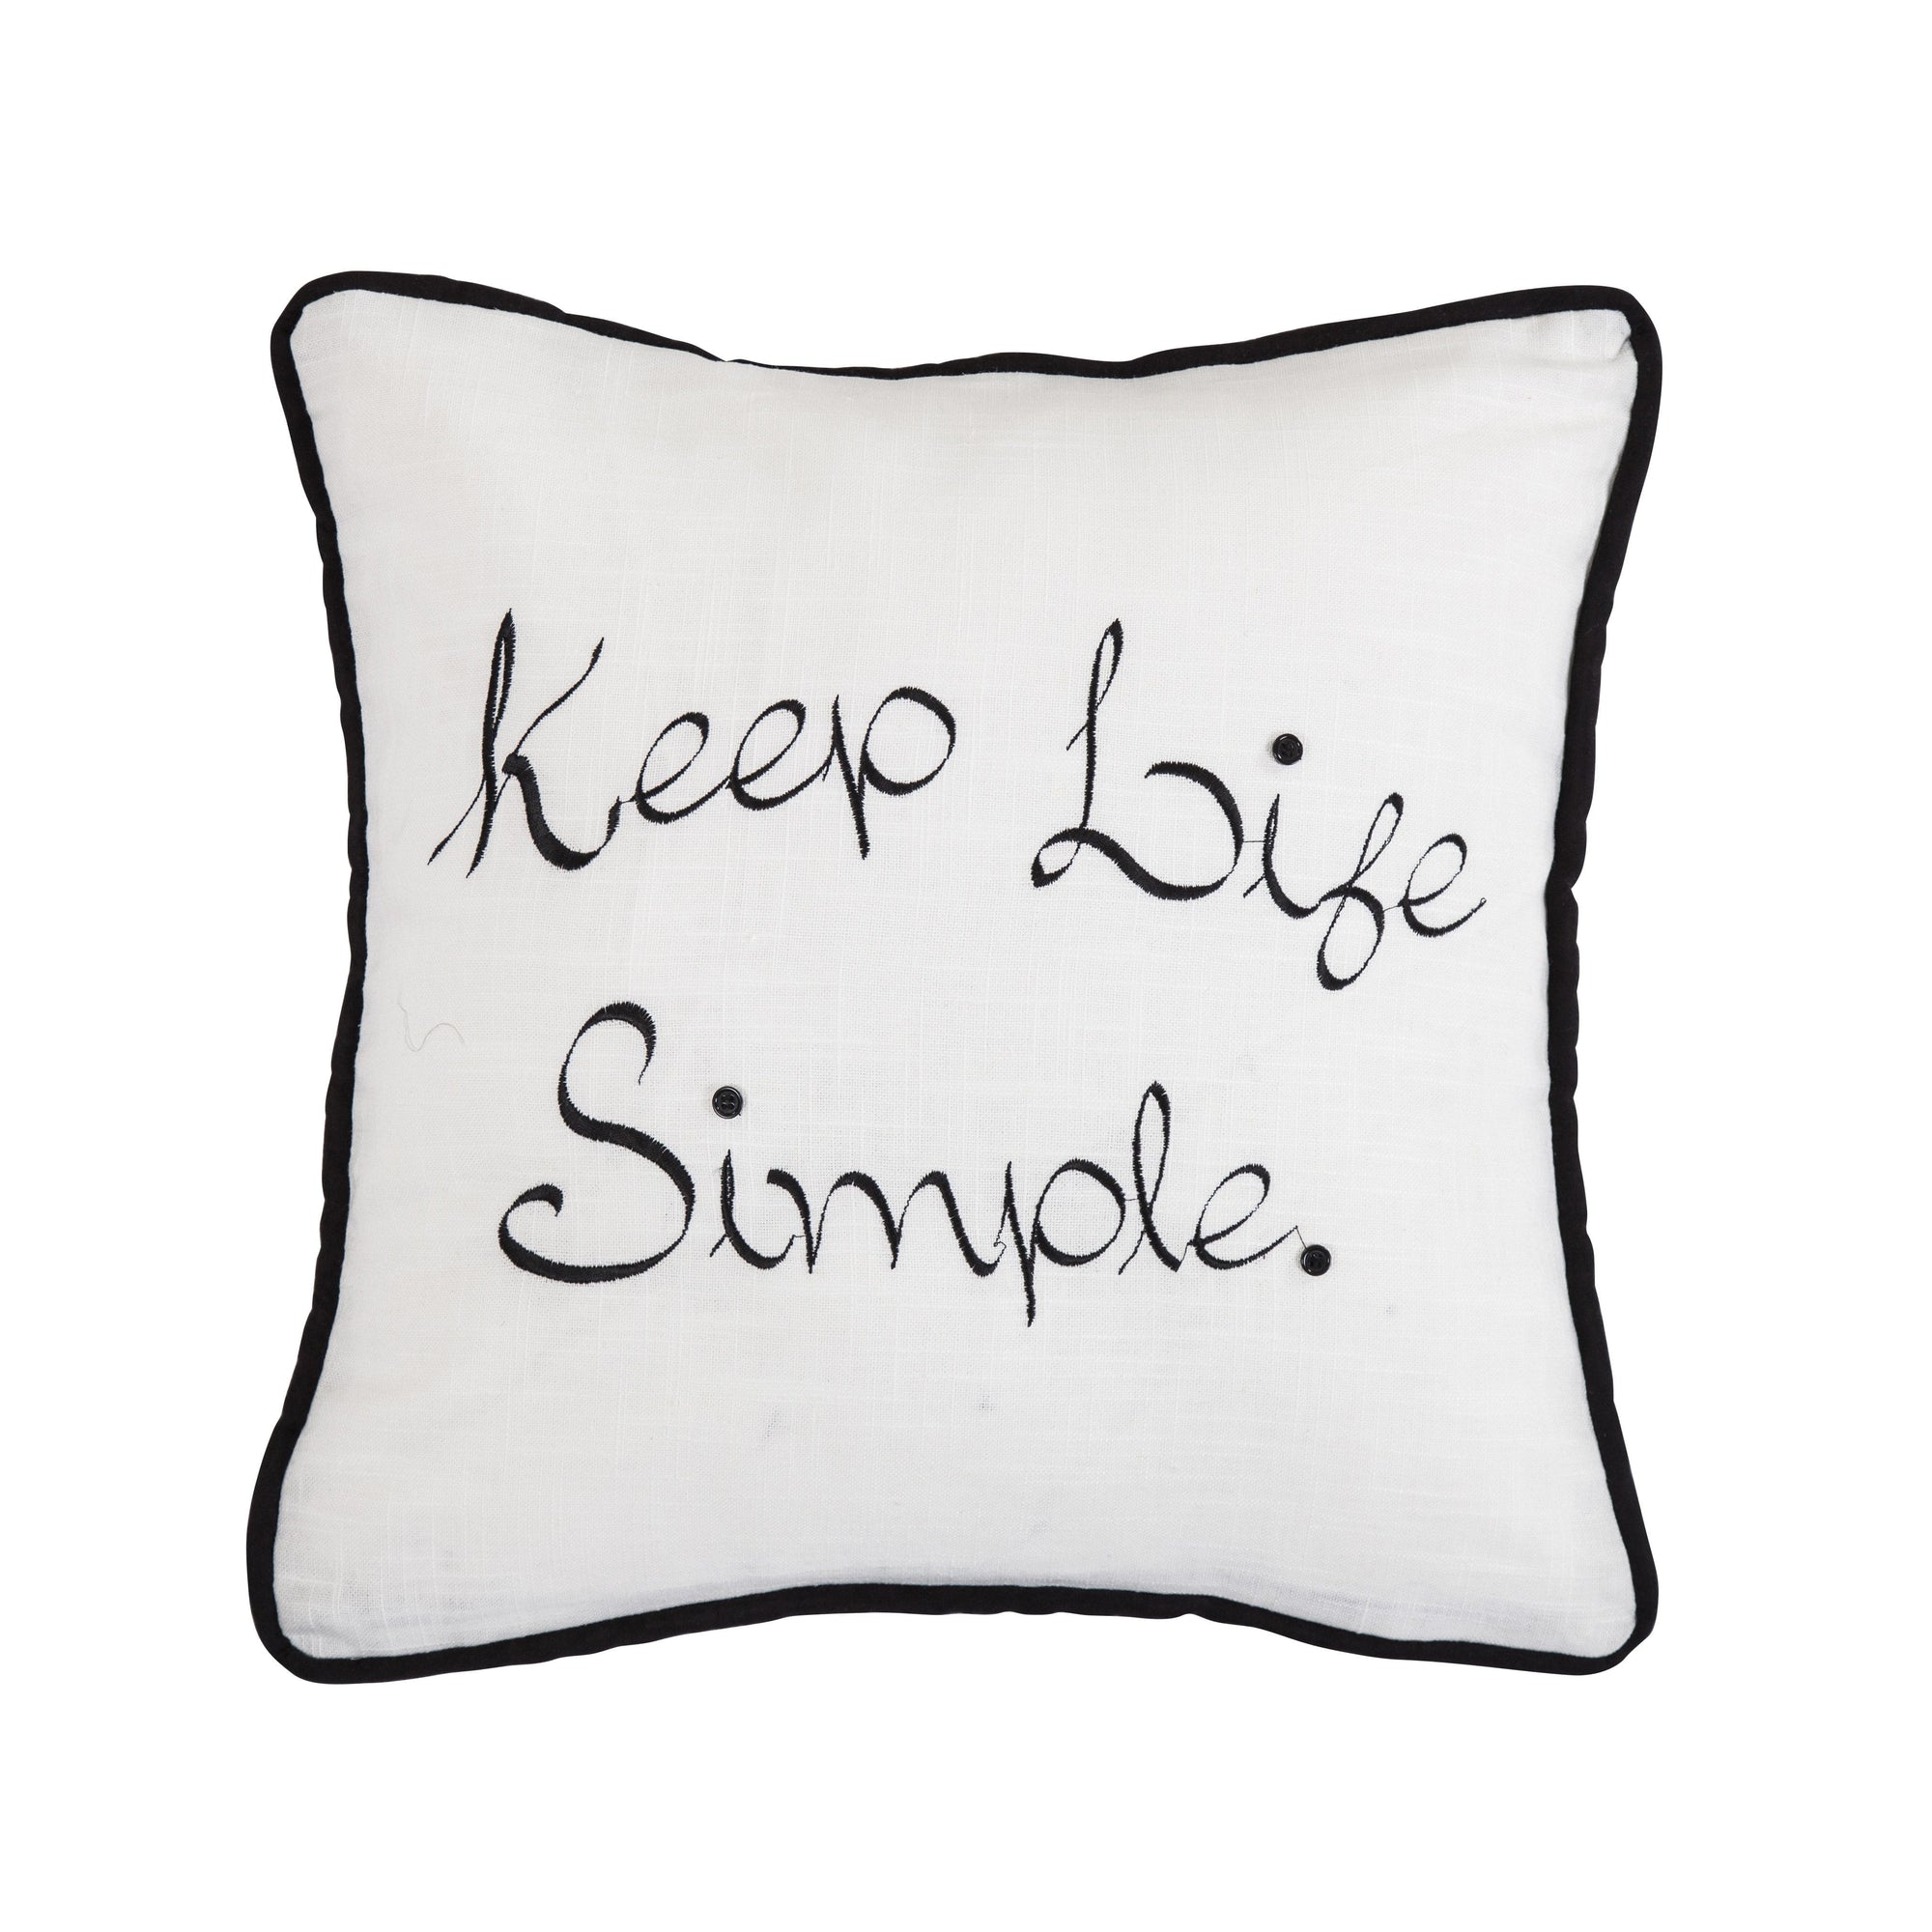 "Keep Life Simple" Embroidery Throw Pillow, 18x18 Pillow